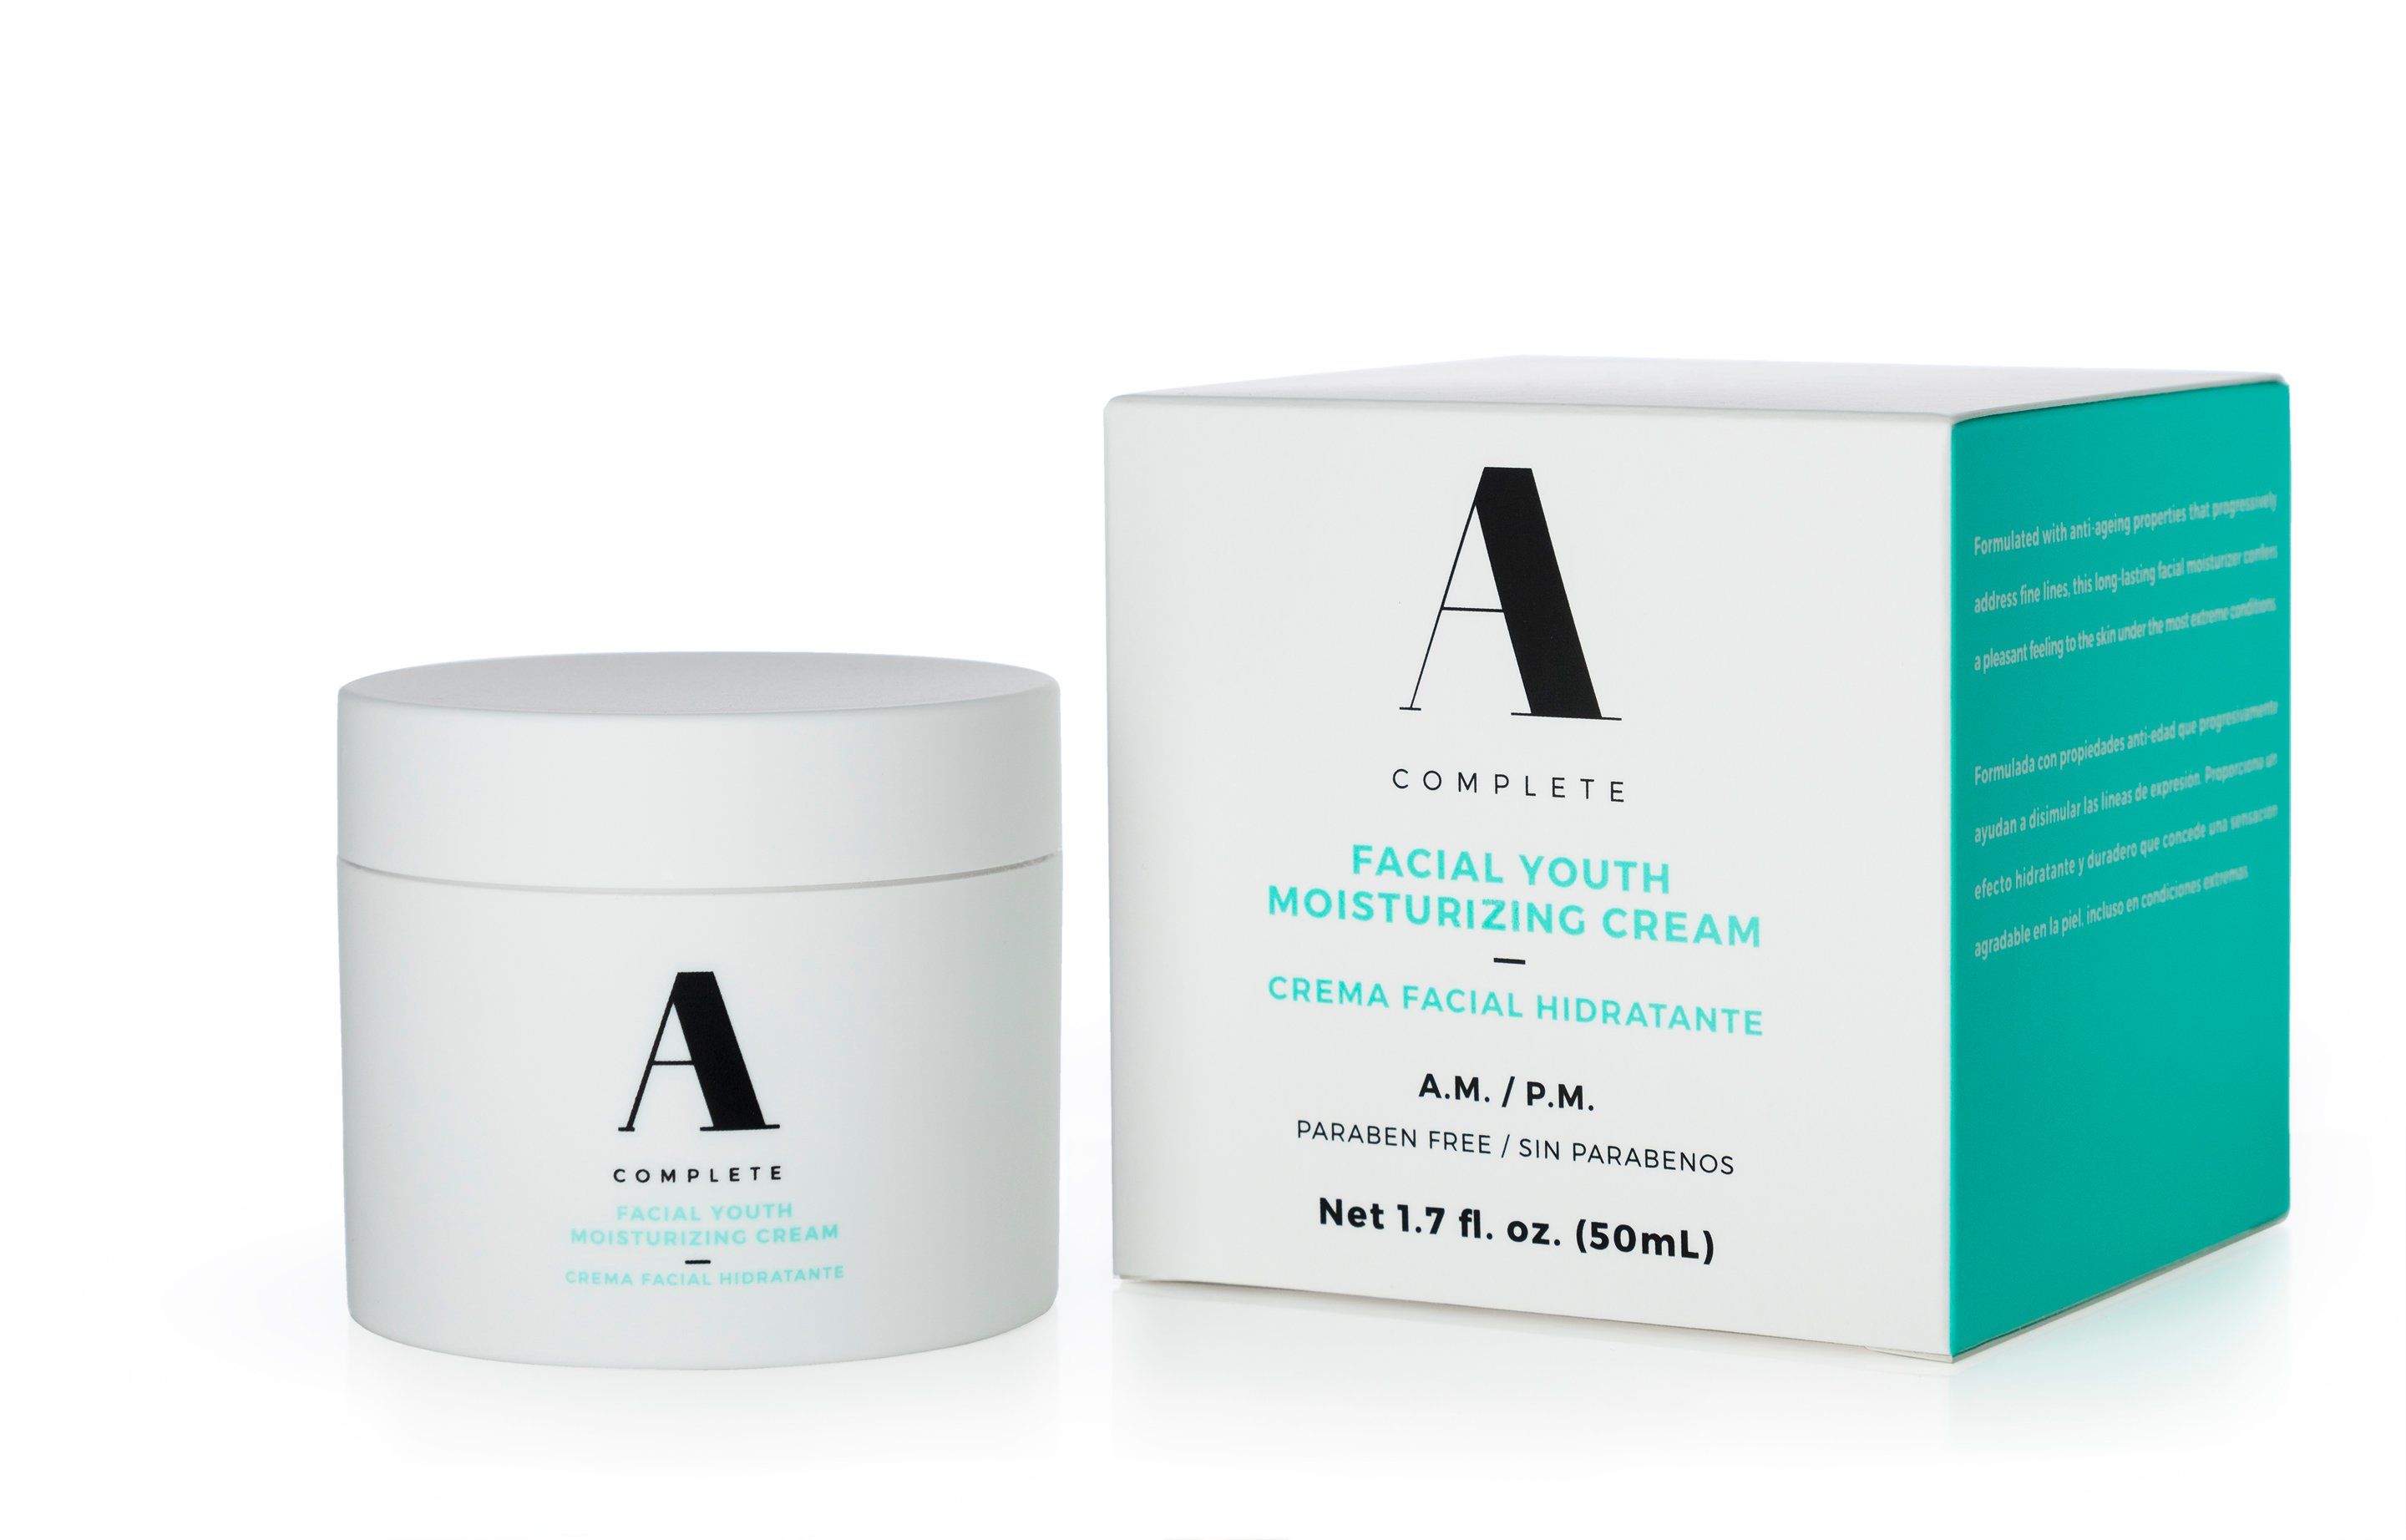 A Complete Facial Youth Moisturizing Cream